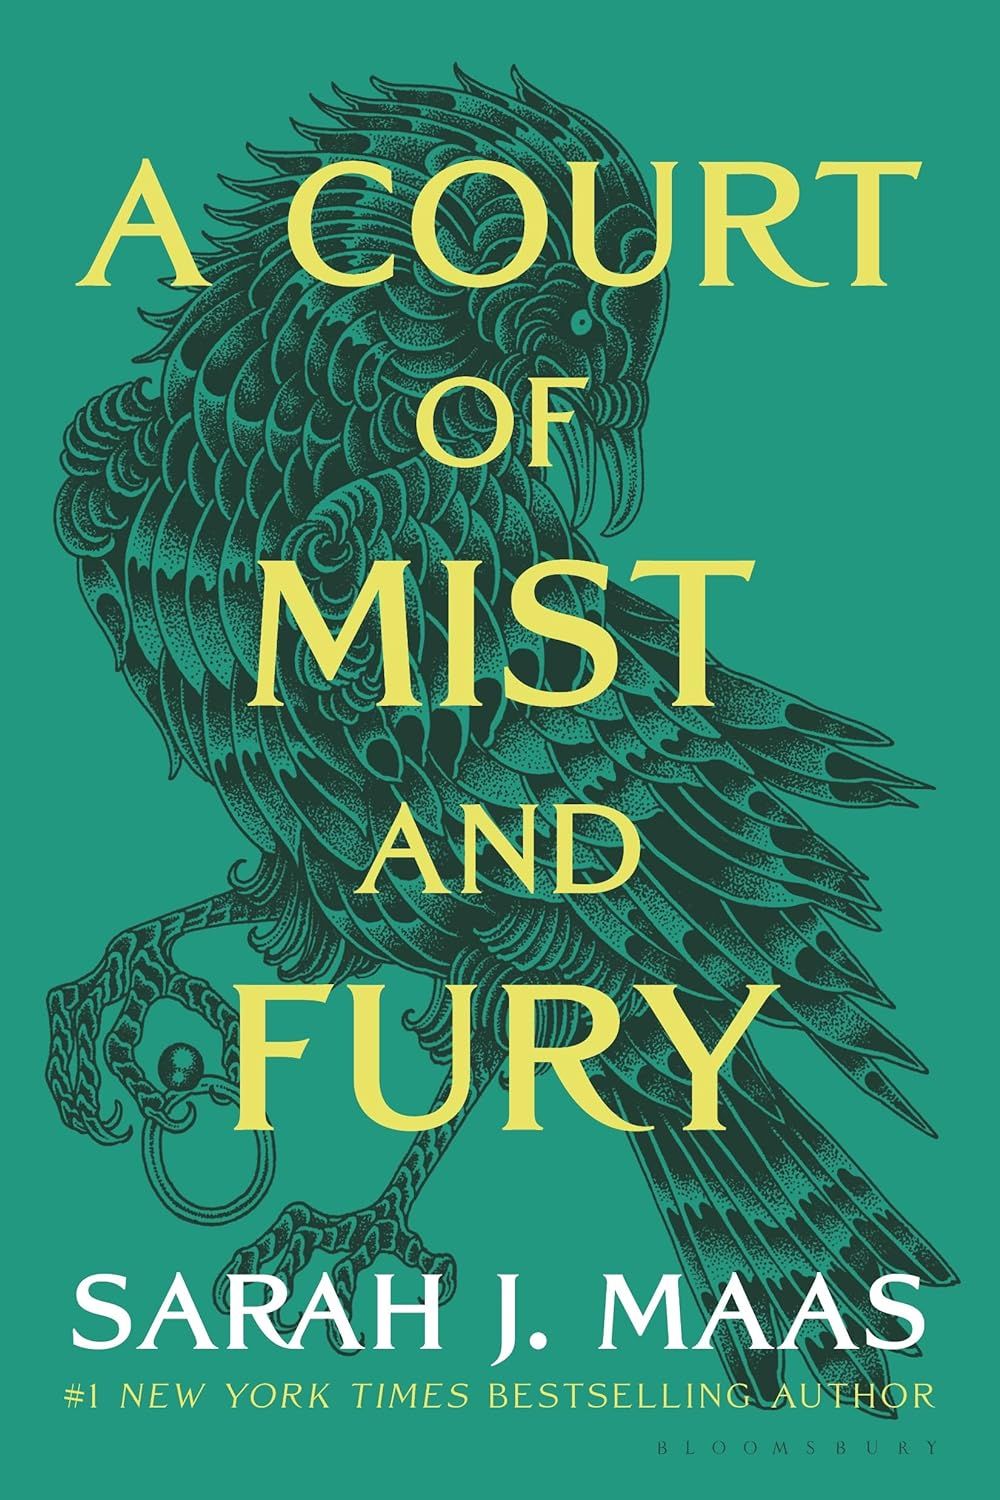 A Court of Mist and Fury (A Court of Thorns and Roses, 2)     Paperback – June 2, 2020 | Amazon (US)